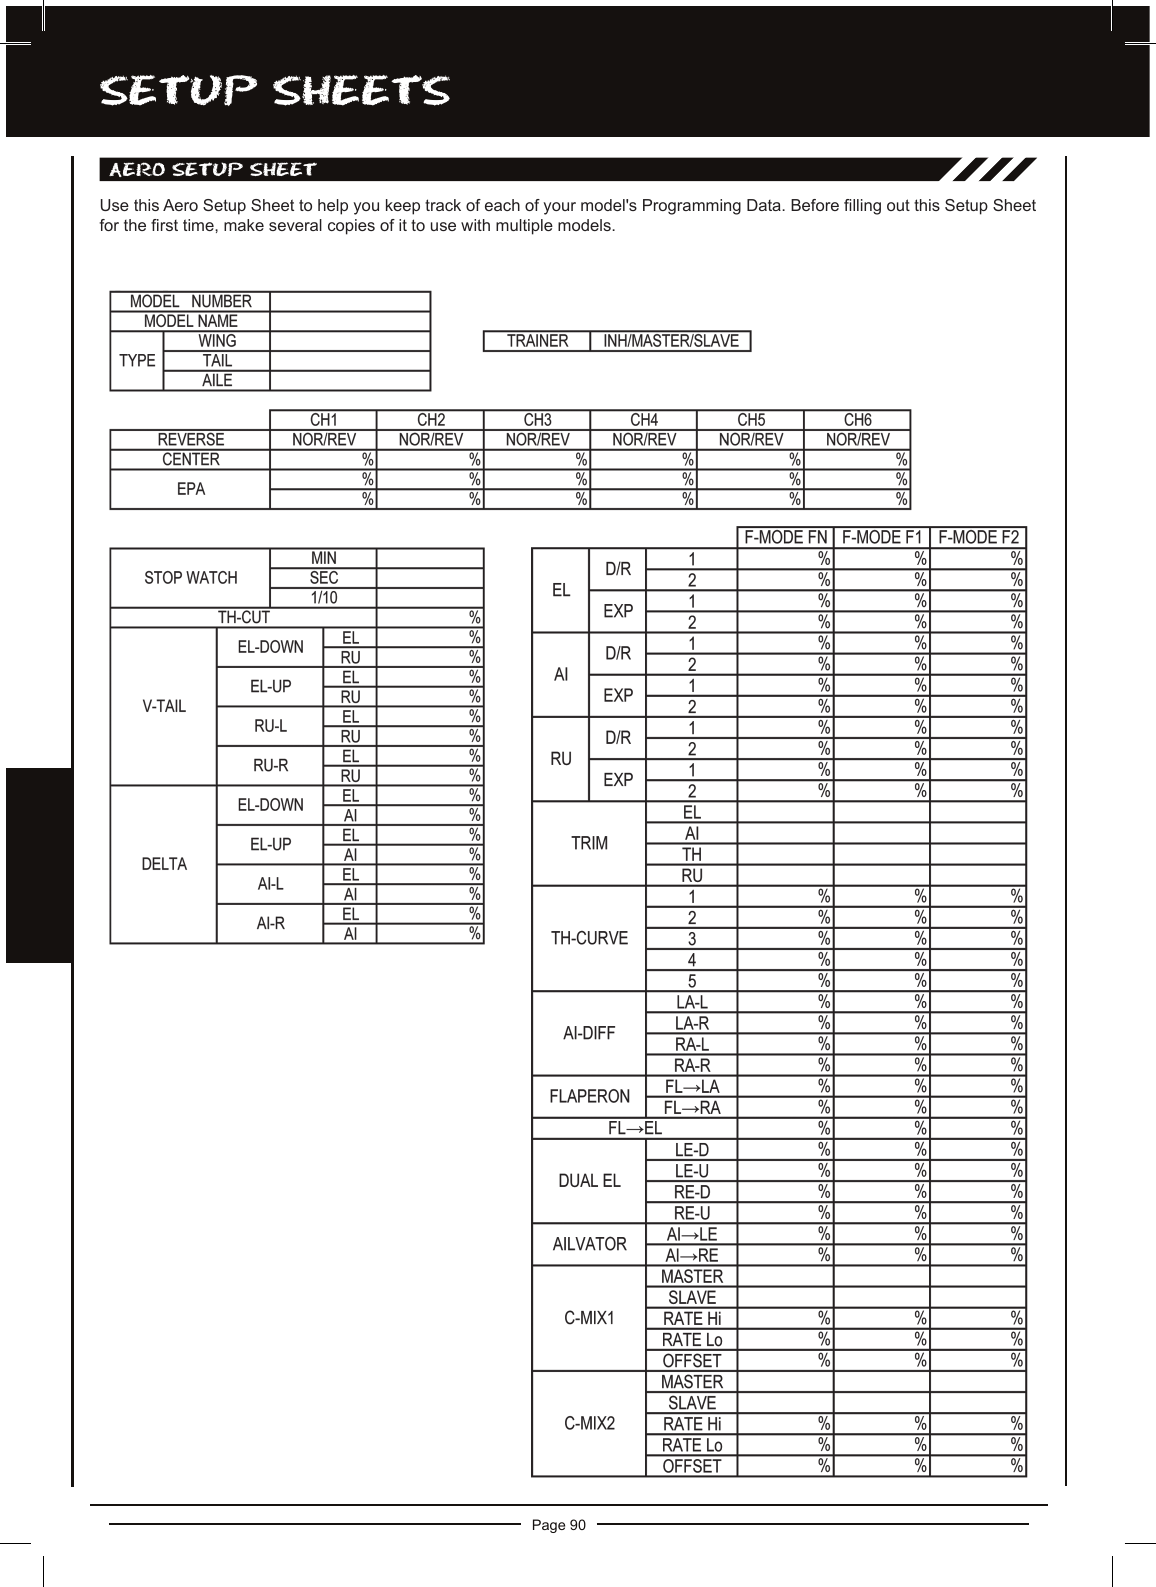 Page 90SETUP ShEETSaERO SETUP ShEETUse this Aero Setup Sheet to help you keep track of each of your model&apos;s Programming Data. Before lling out this Setup Sheet for the rst time, make several copies of it to use with multiple models.